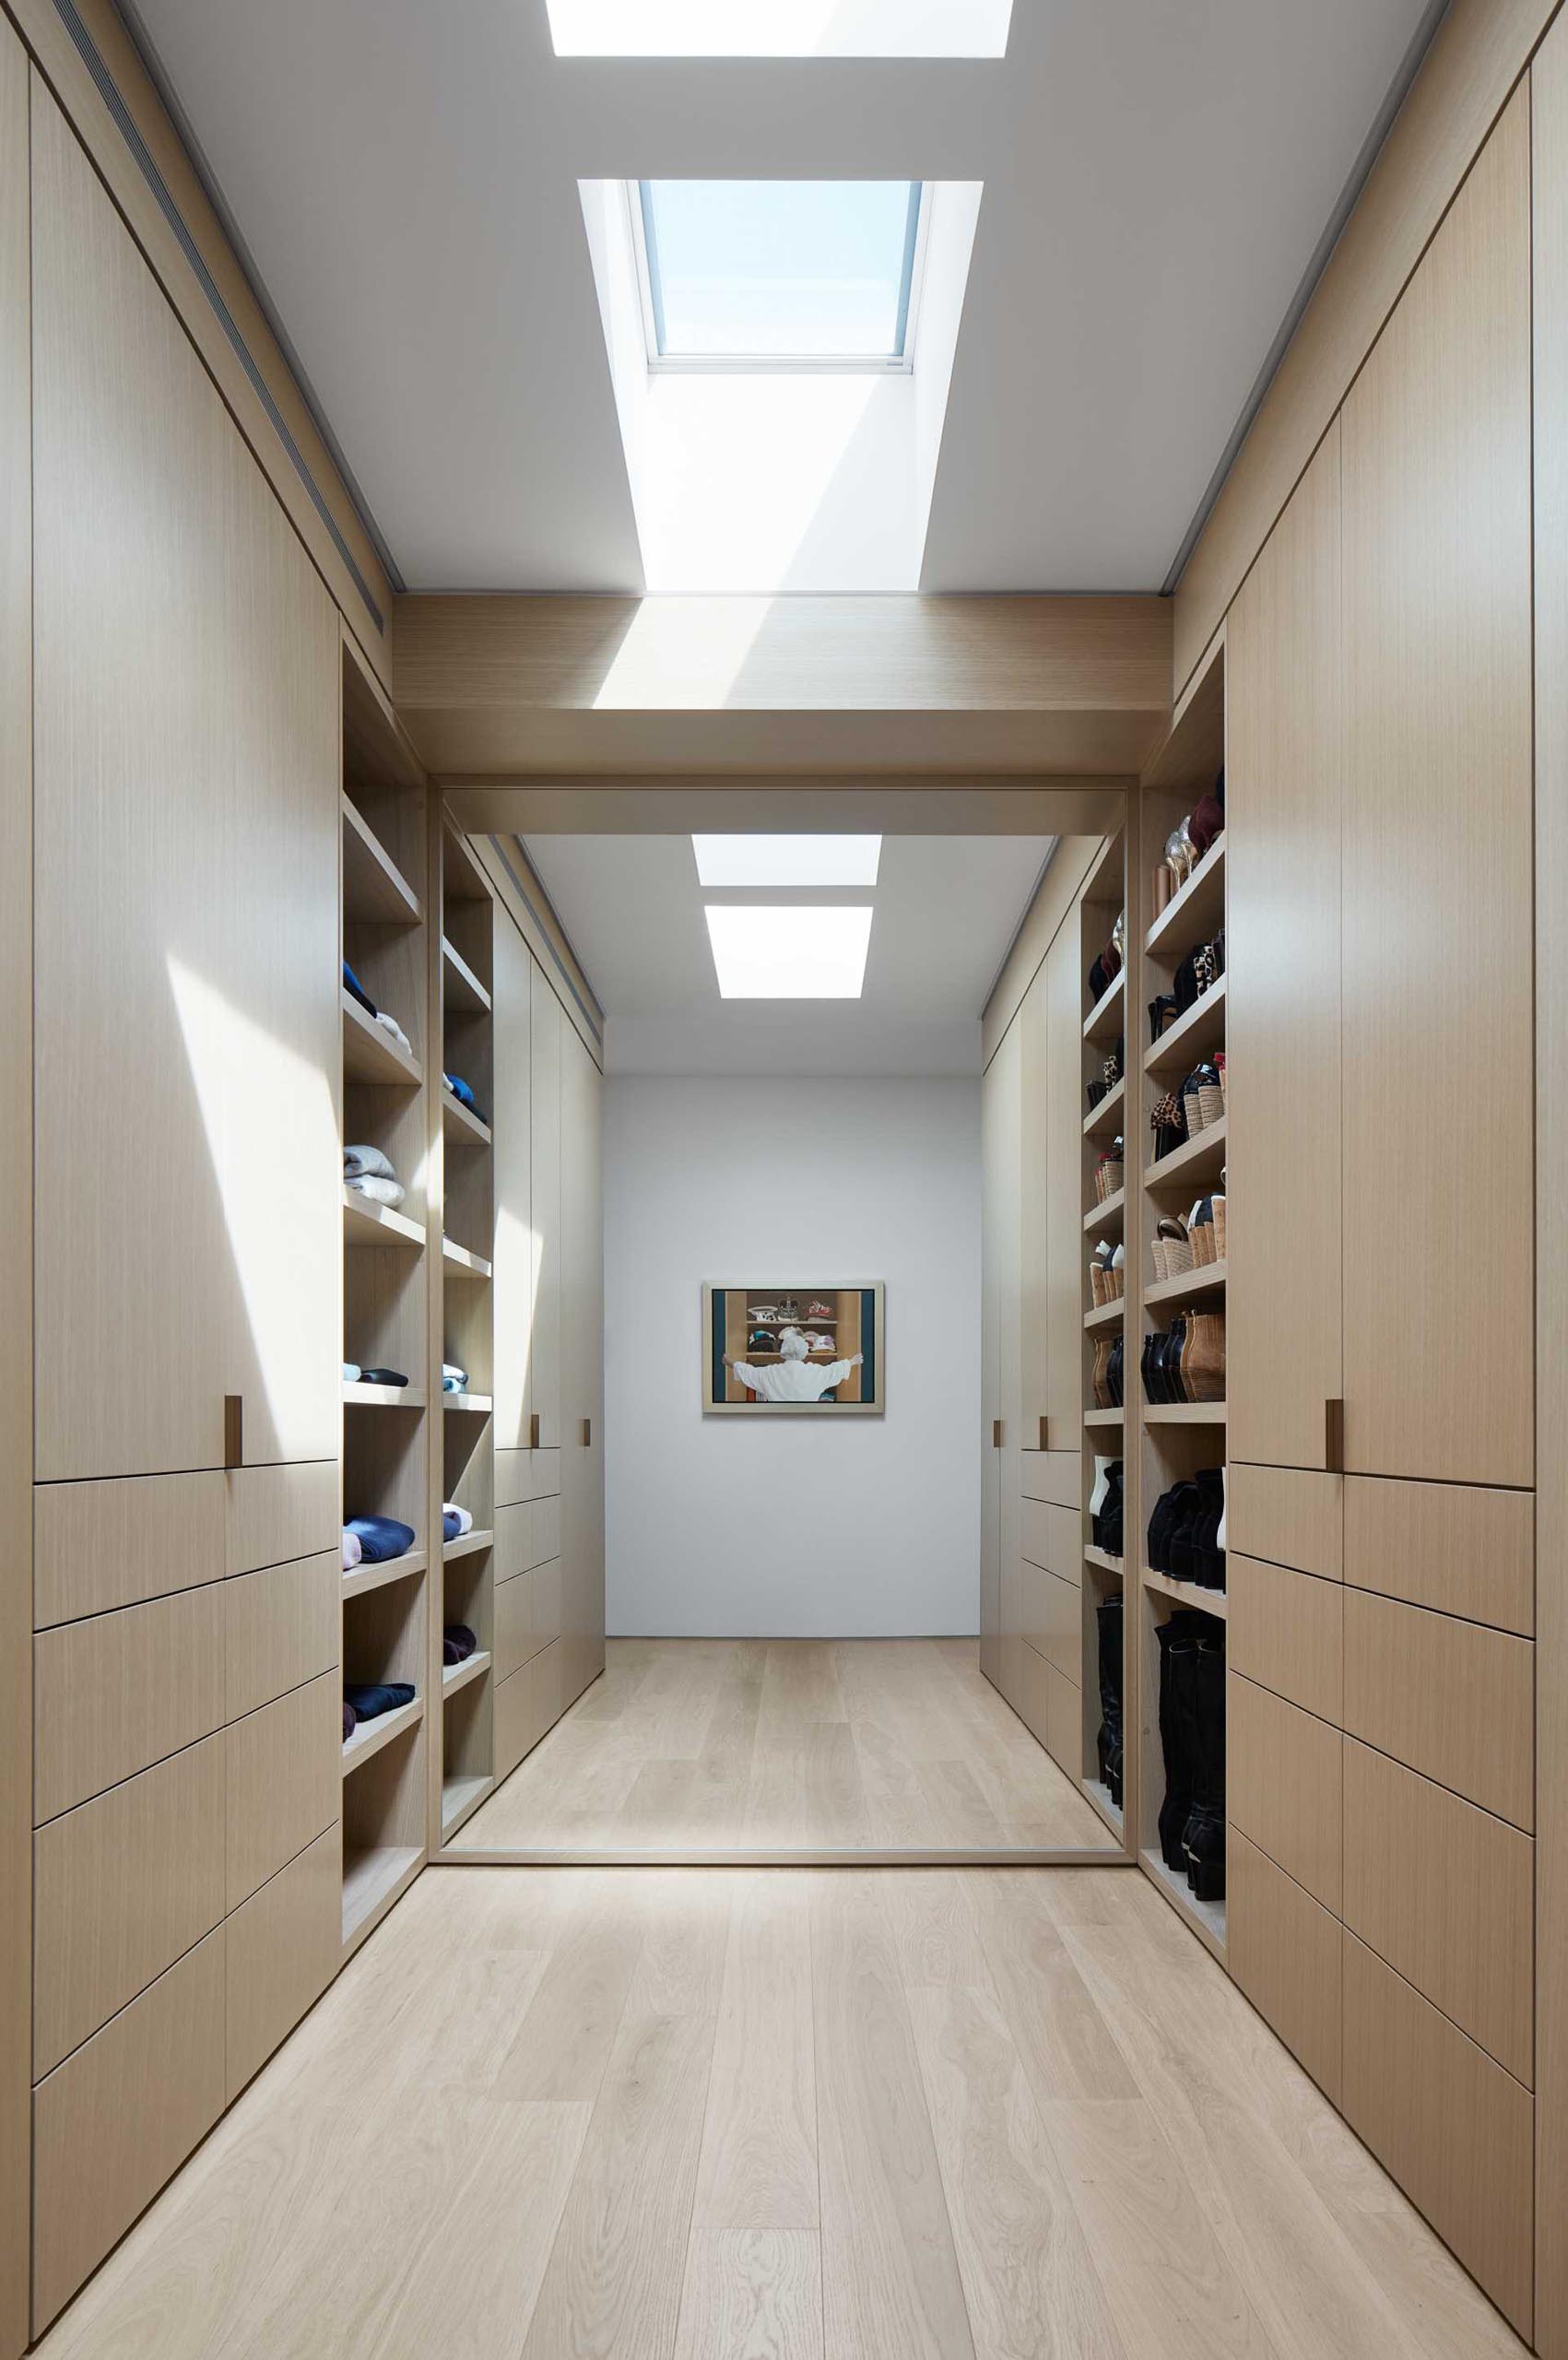 This modern walk-in closet has shoe storage, a large mirror, and skylights.